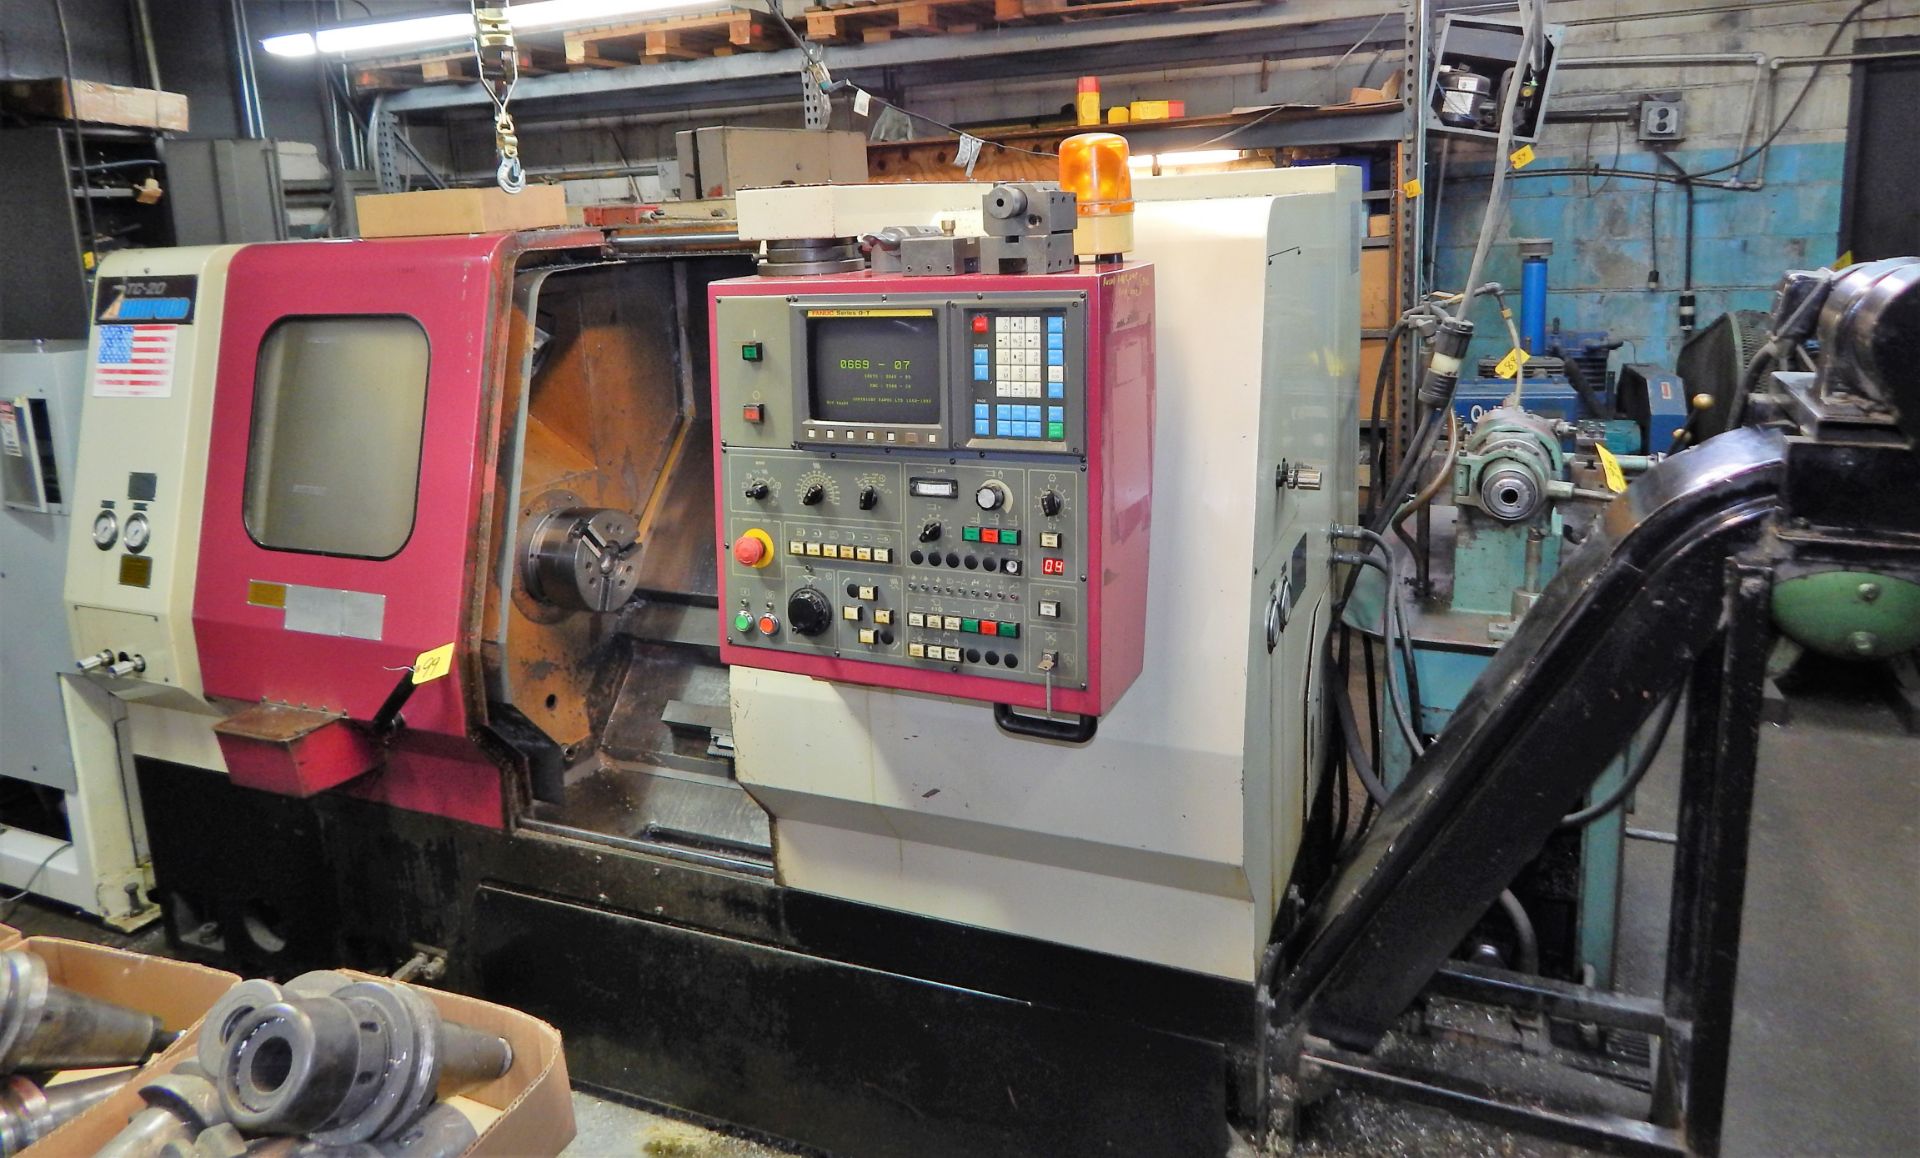 JOHNSFORD MDL. T-20 CNC LATHE WITH 16.54" SWING OVER BED, 11.81" SWING OVER CROSSLIDE, 20.47"